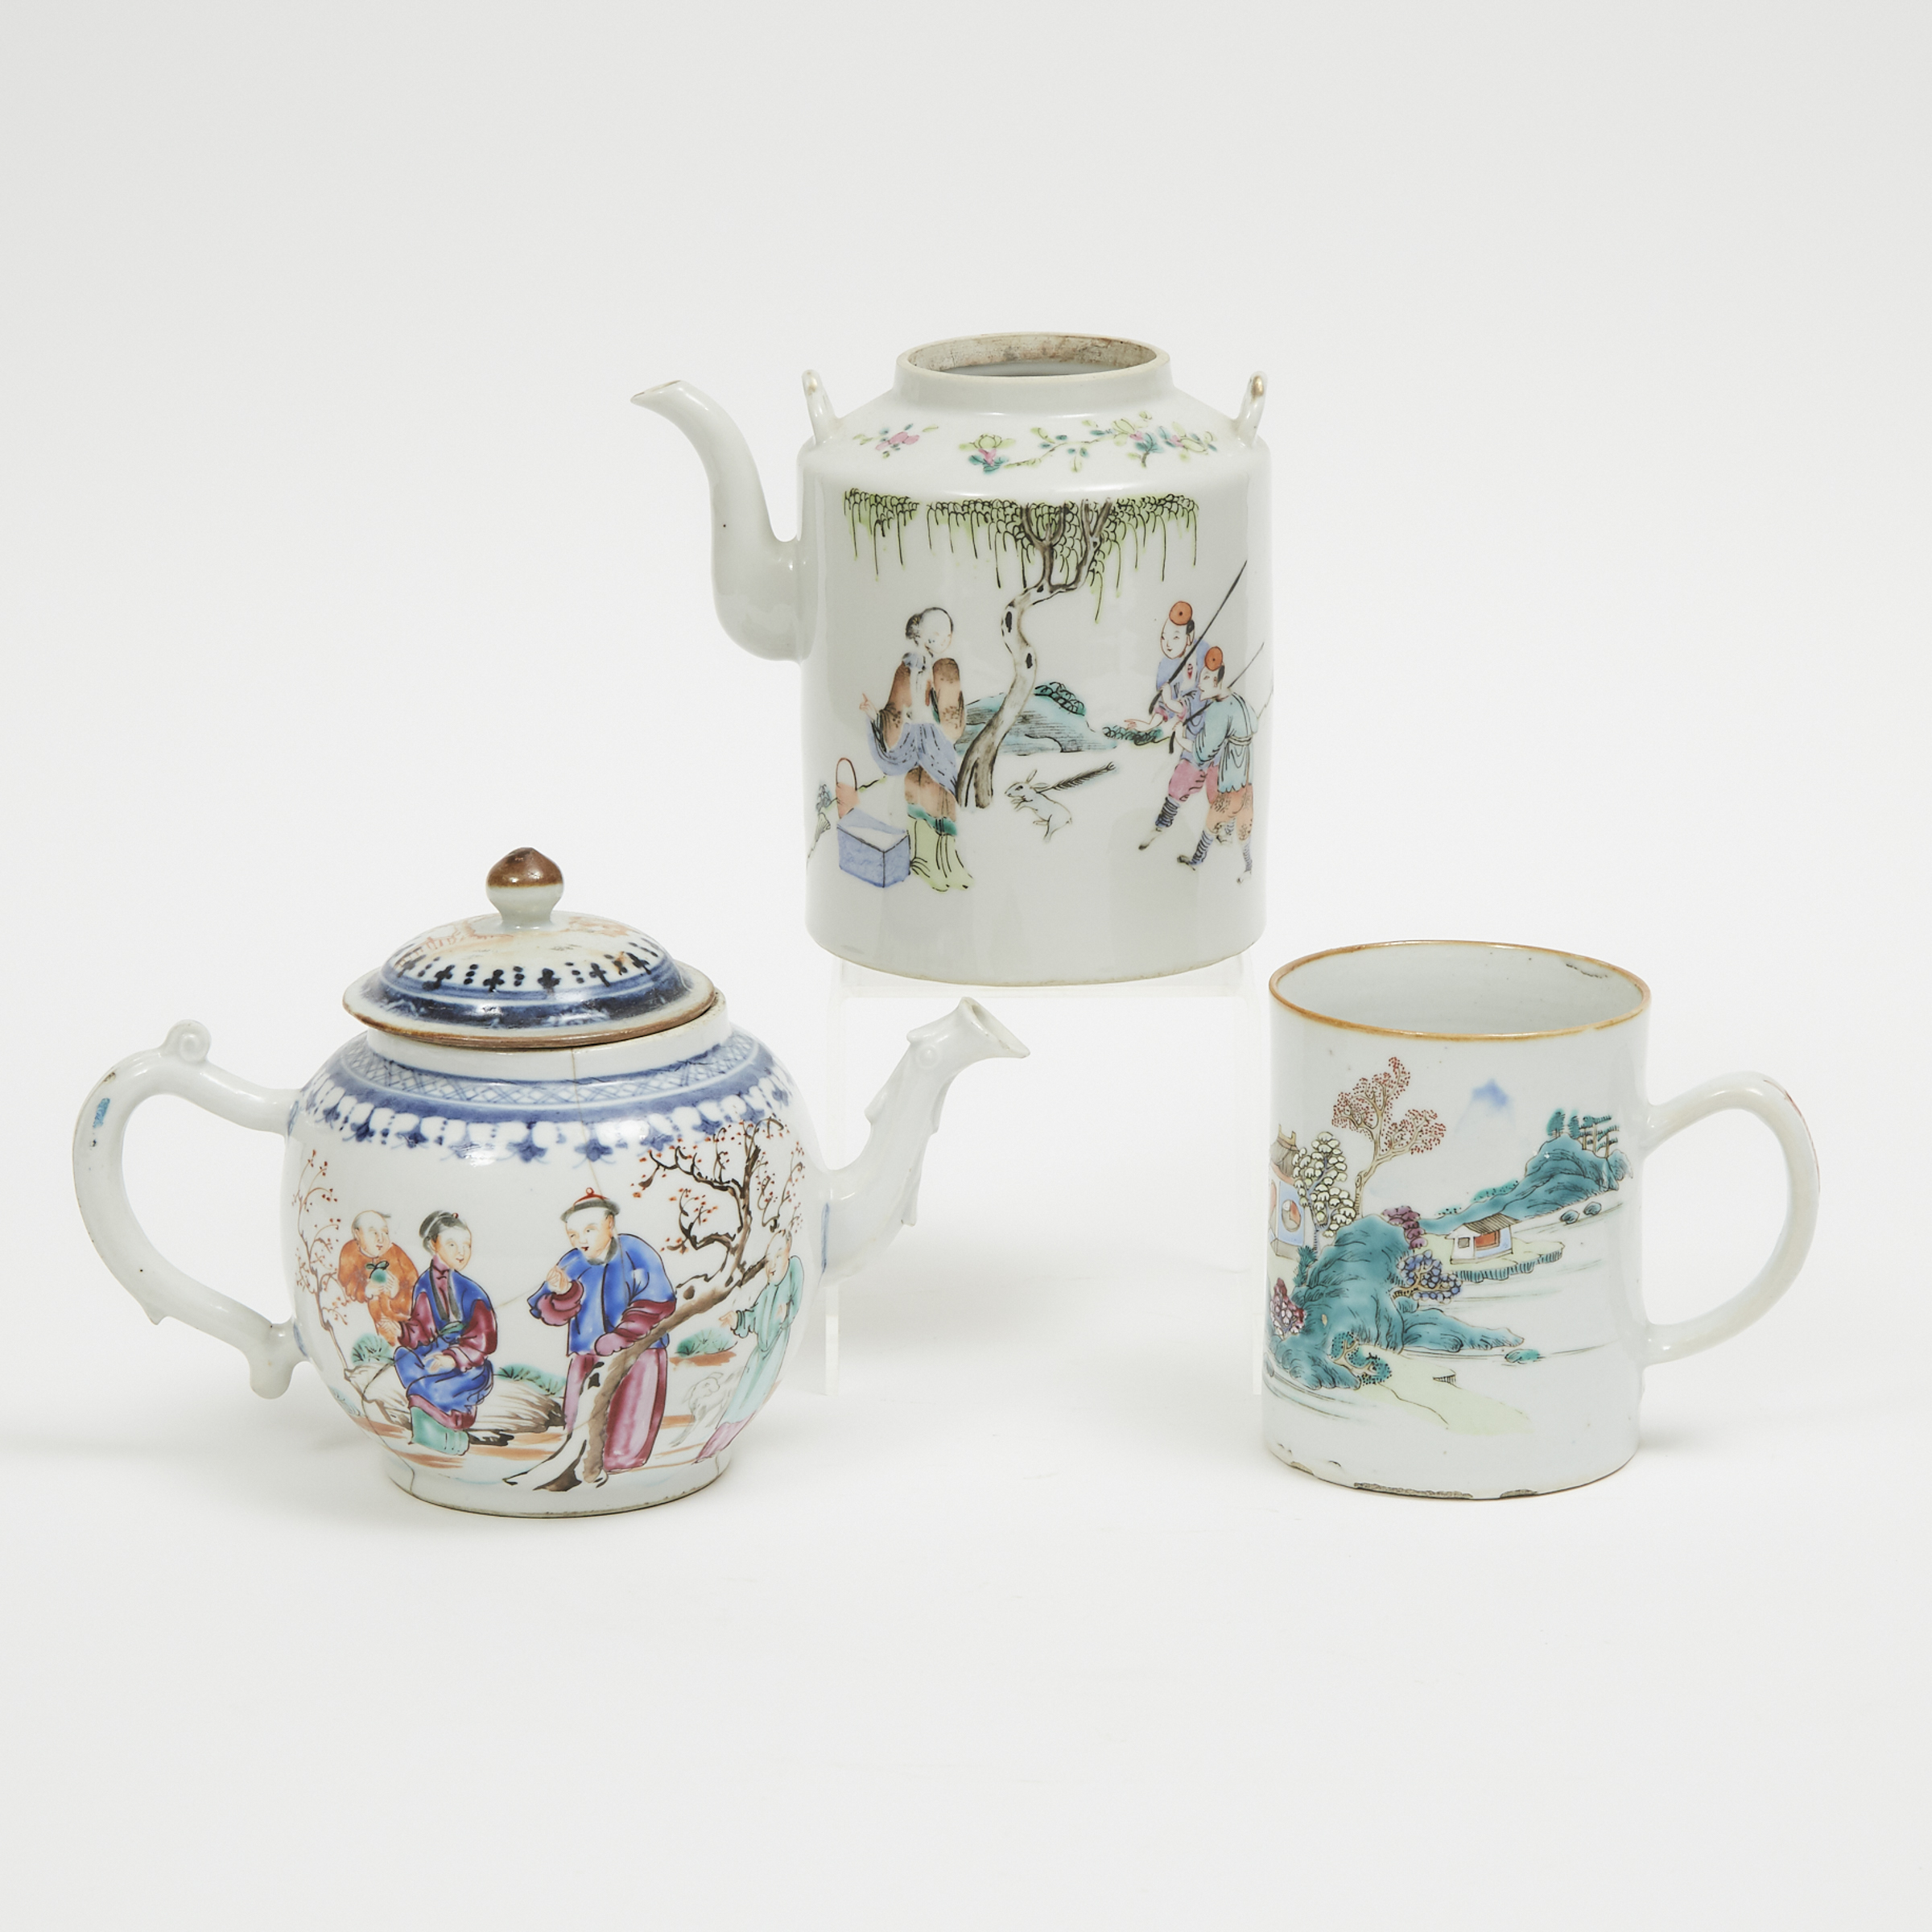 A Group of Three Chinese Export Teapots and Mug, 18th Century or Later